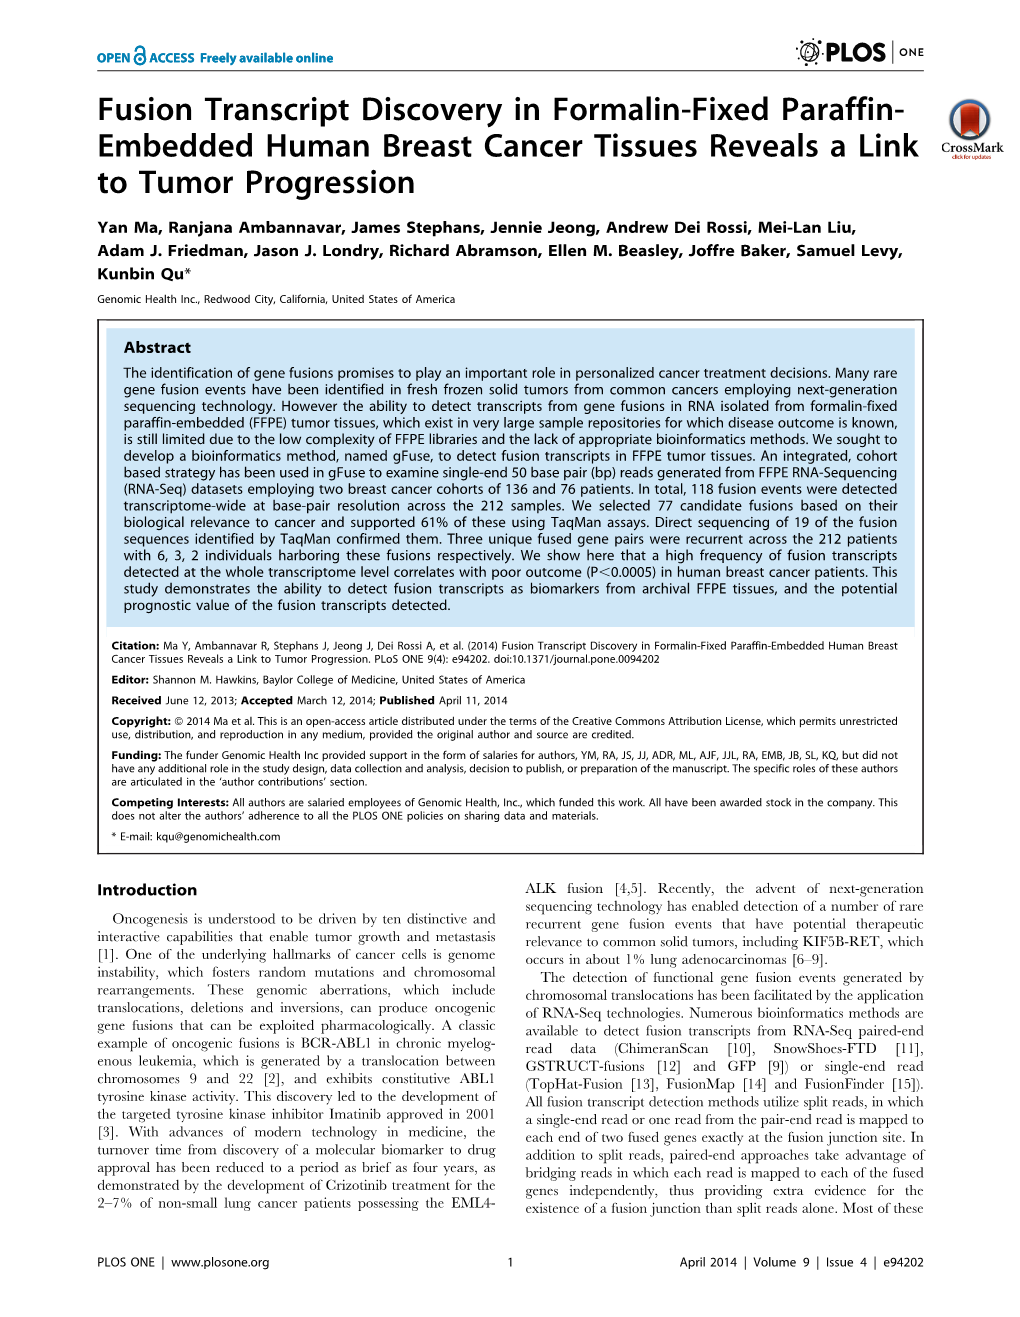 Embedded Human Breast Cancer Tissues Reveals a Link to Tumor Progression